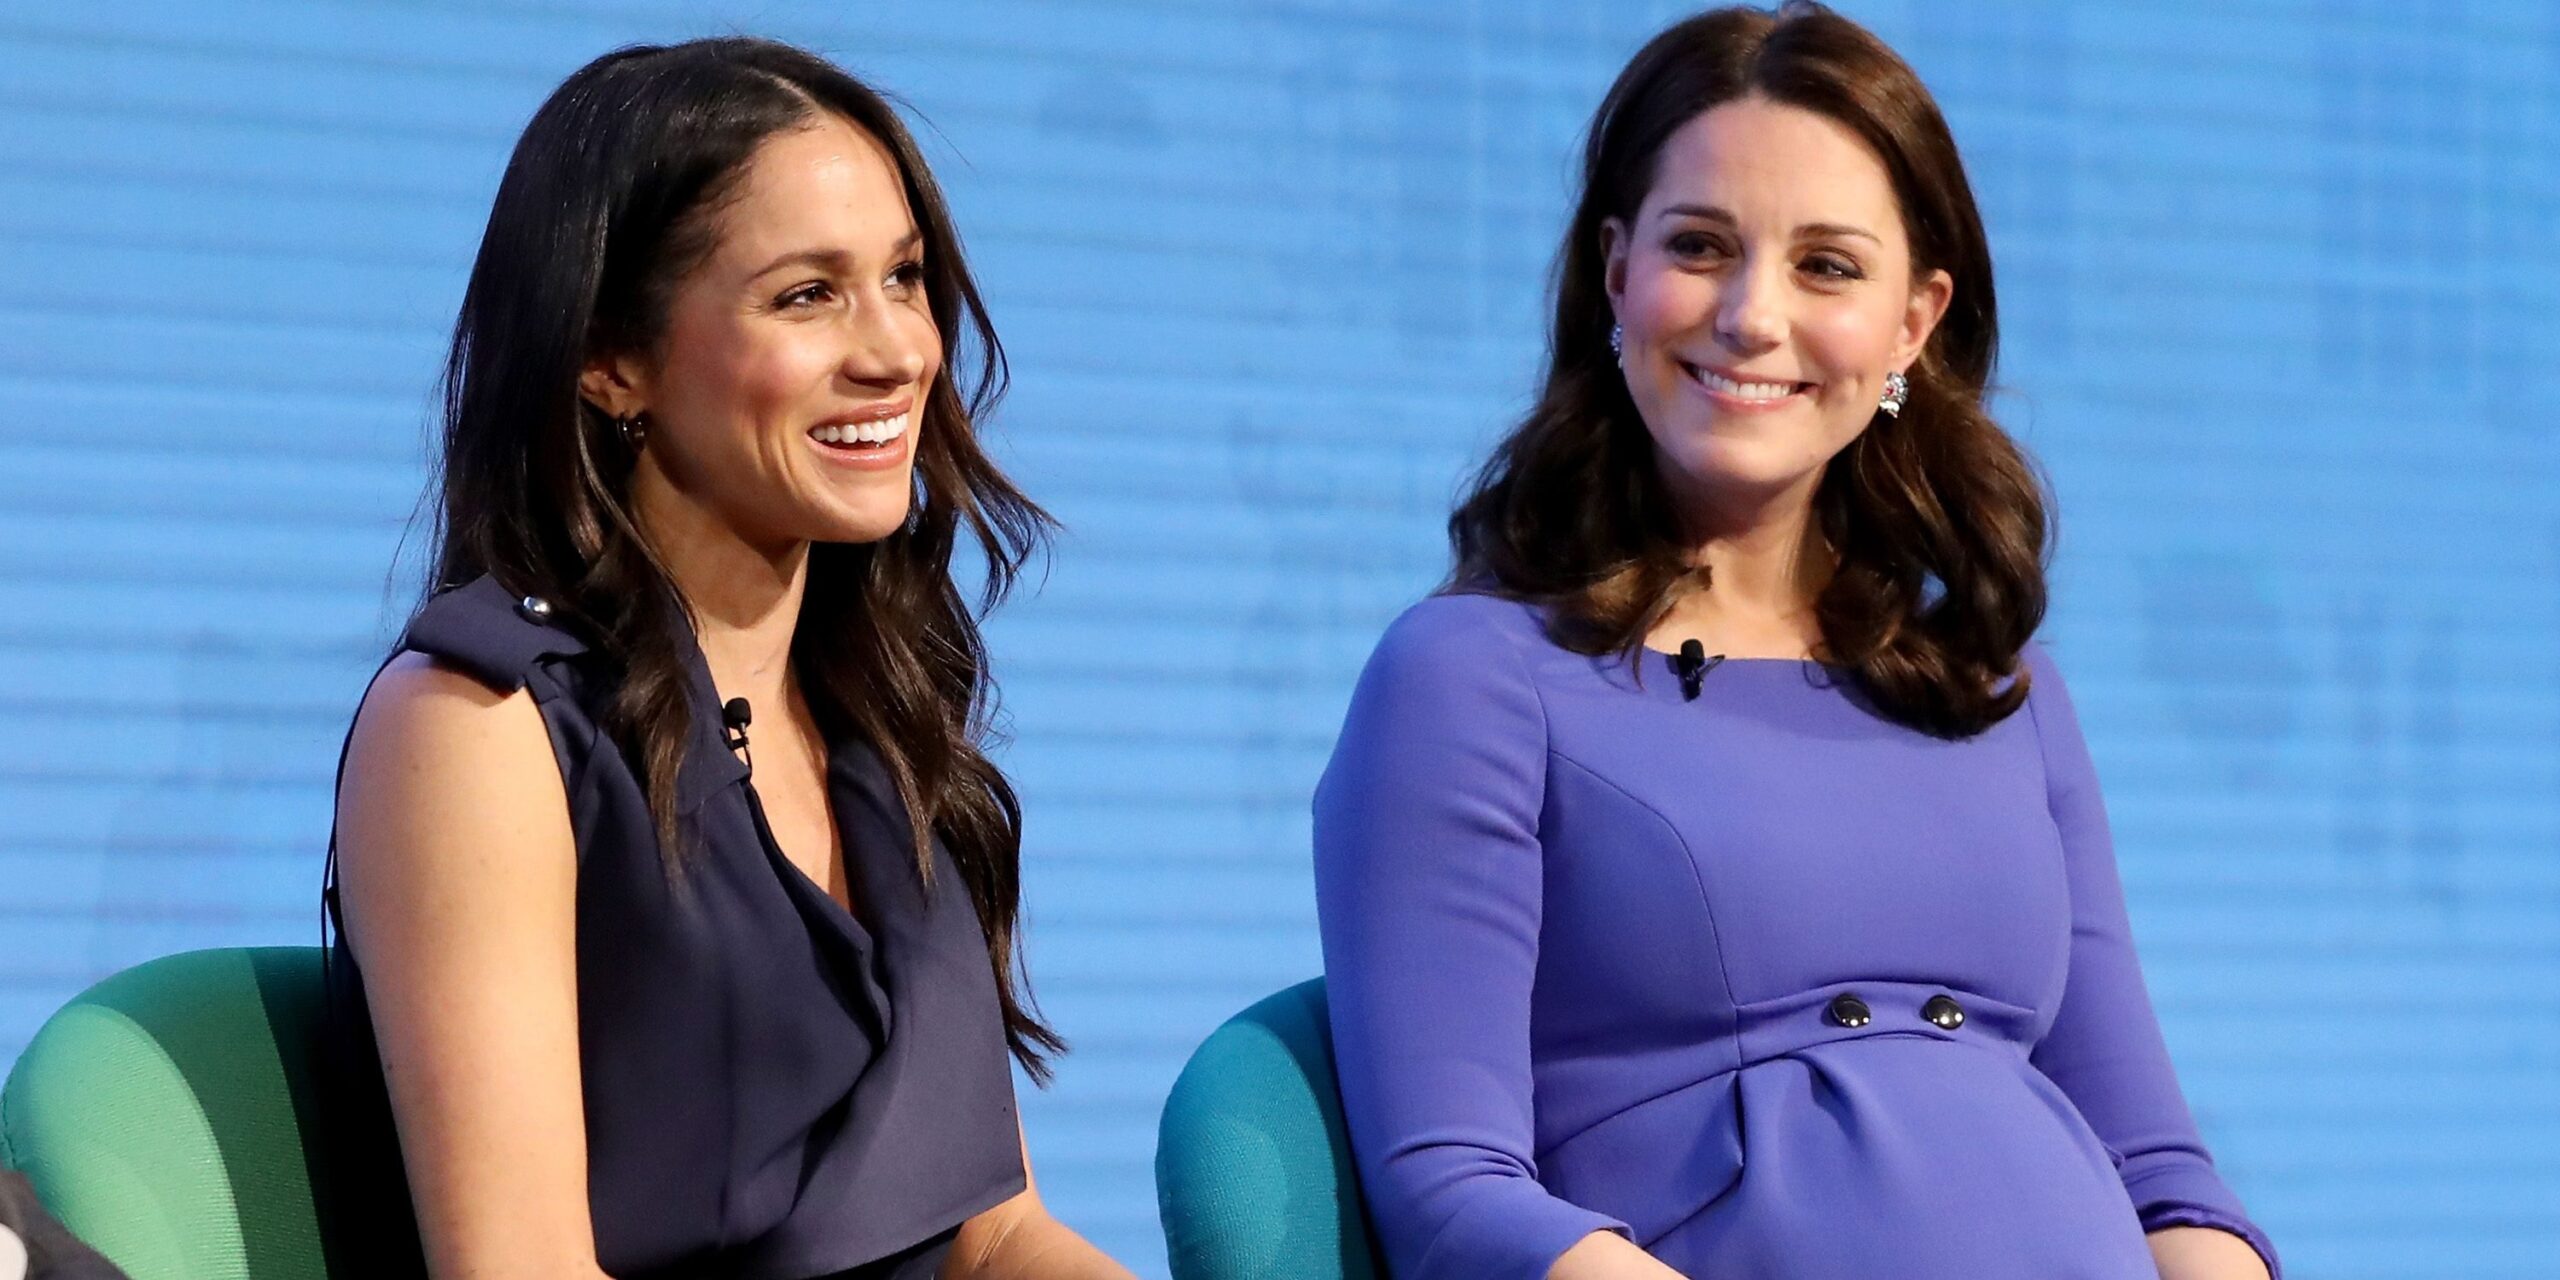 From 'cool' to 'frosty' - an insight into Meghan Markle and Kate Middleton's relationship